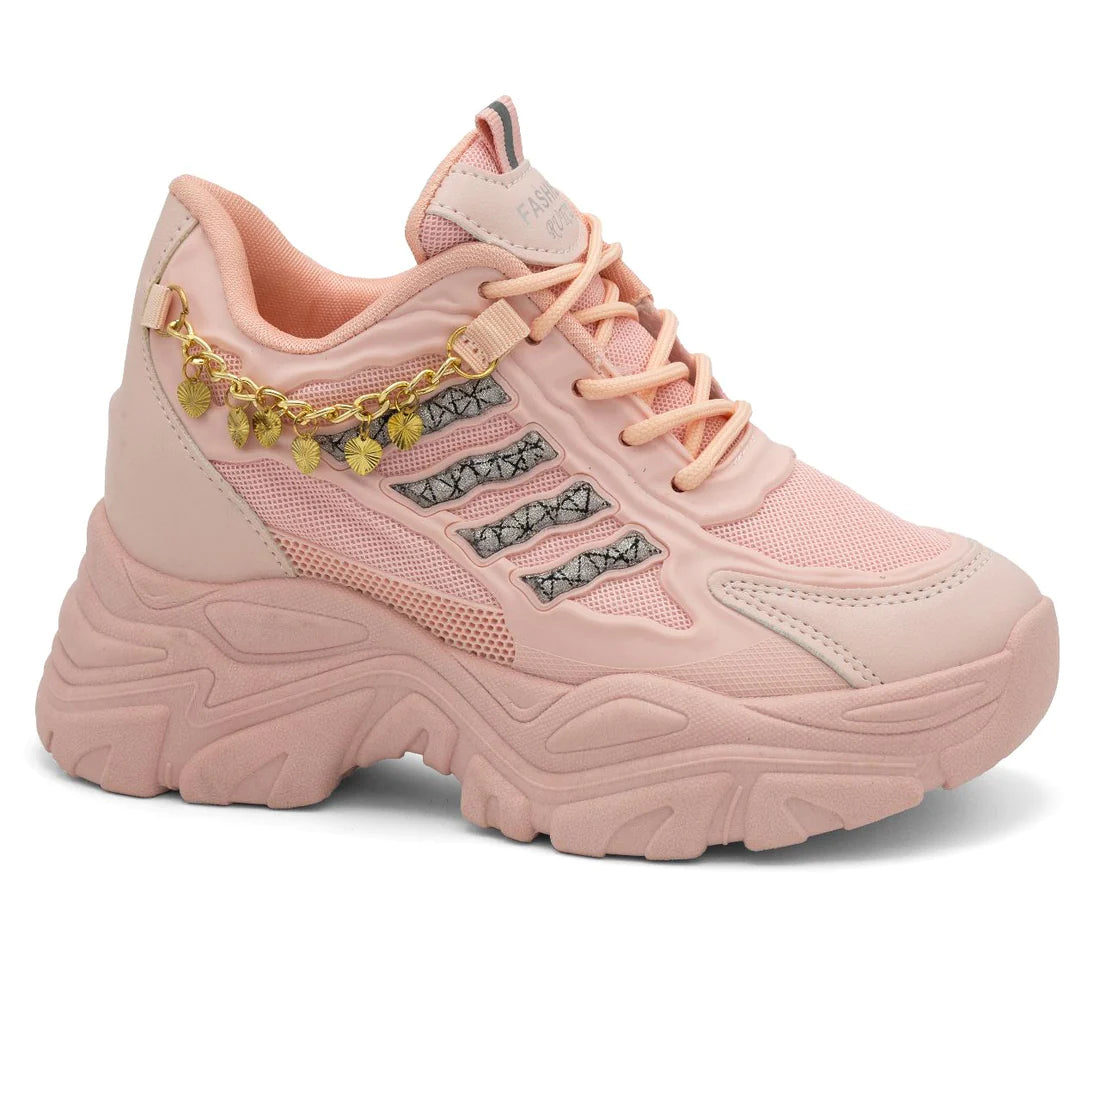 Women's Sneakers Shinny Design Breathable Bling Casual Shoes Sport Shoe Woman Shoes White Pink